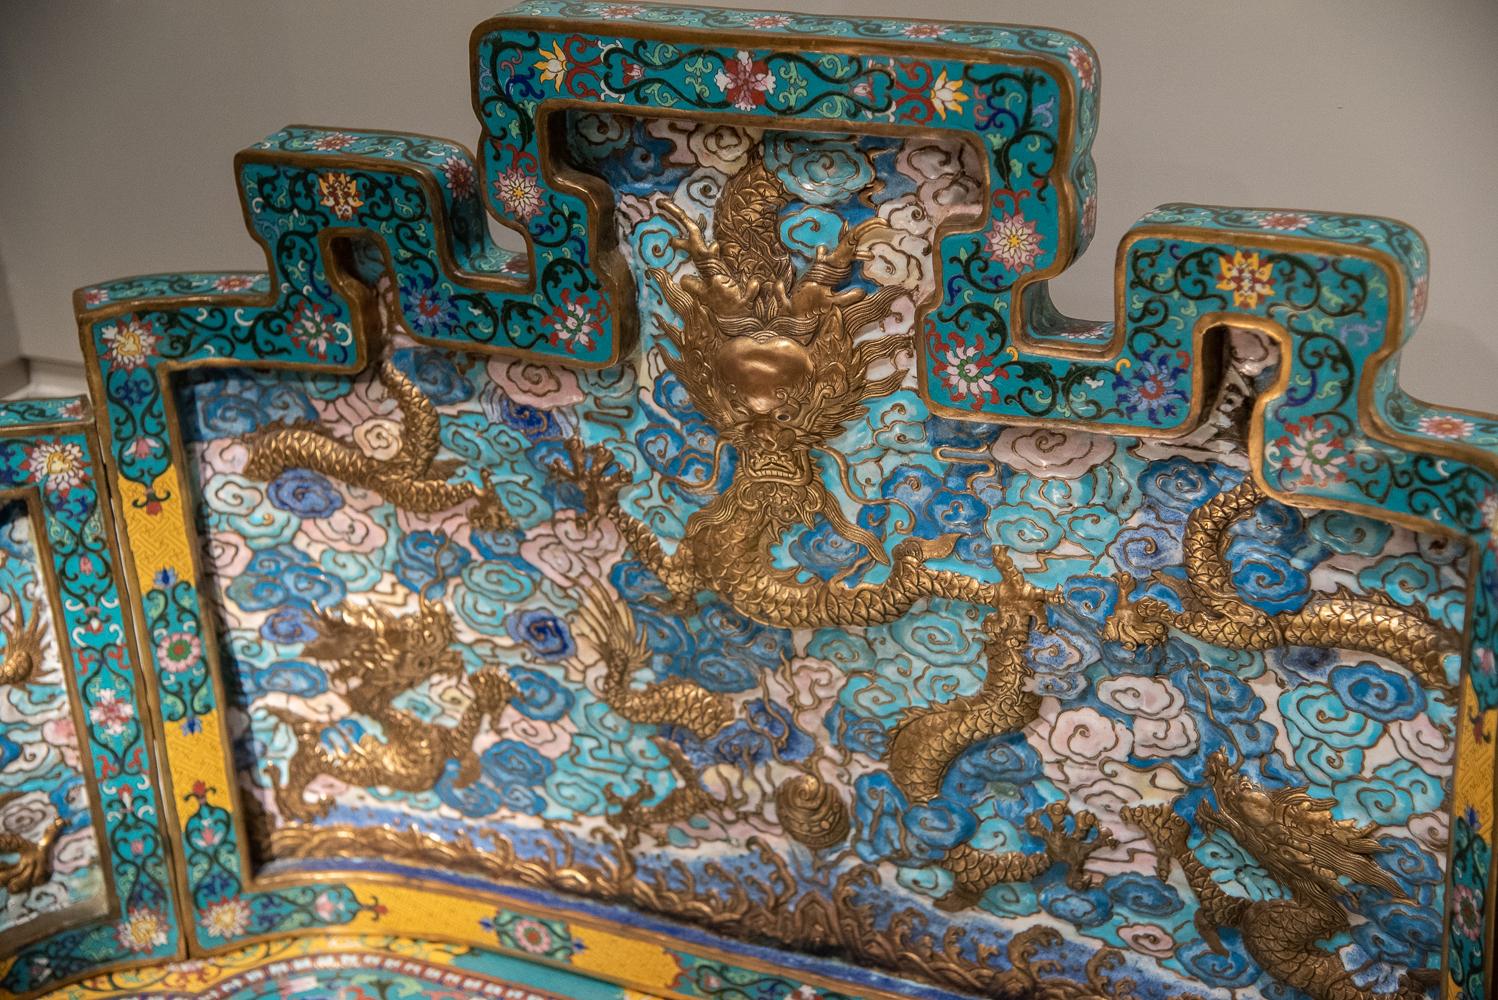 Rare imperial gilt copper and cloisonné enameled throne and footrest of extraordinary design and execution.

Of rounded rectangle conformation, the back shaped to represent the five (5) sacred mountains. The recess-paneled sides, back, and apron